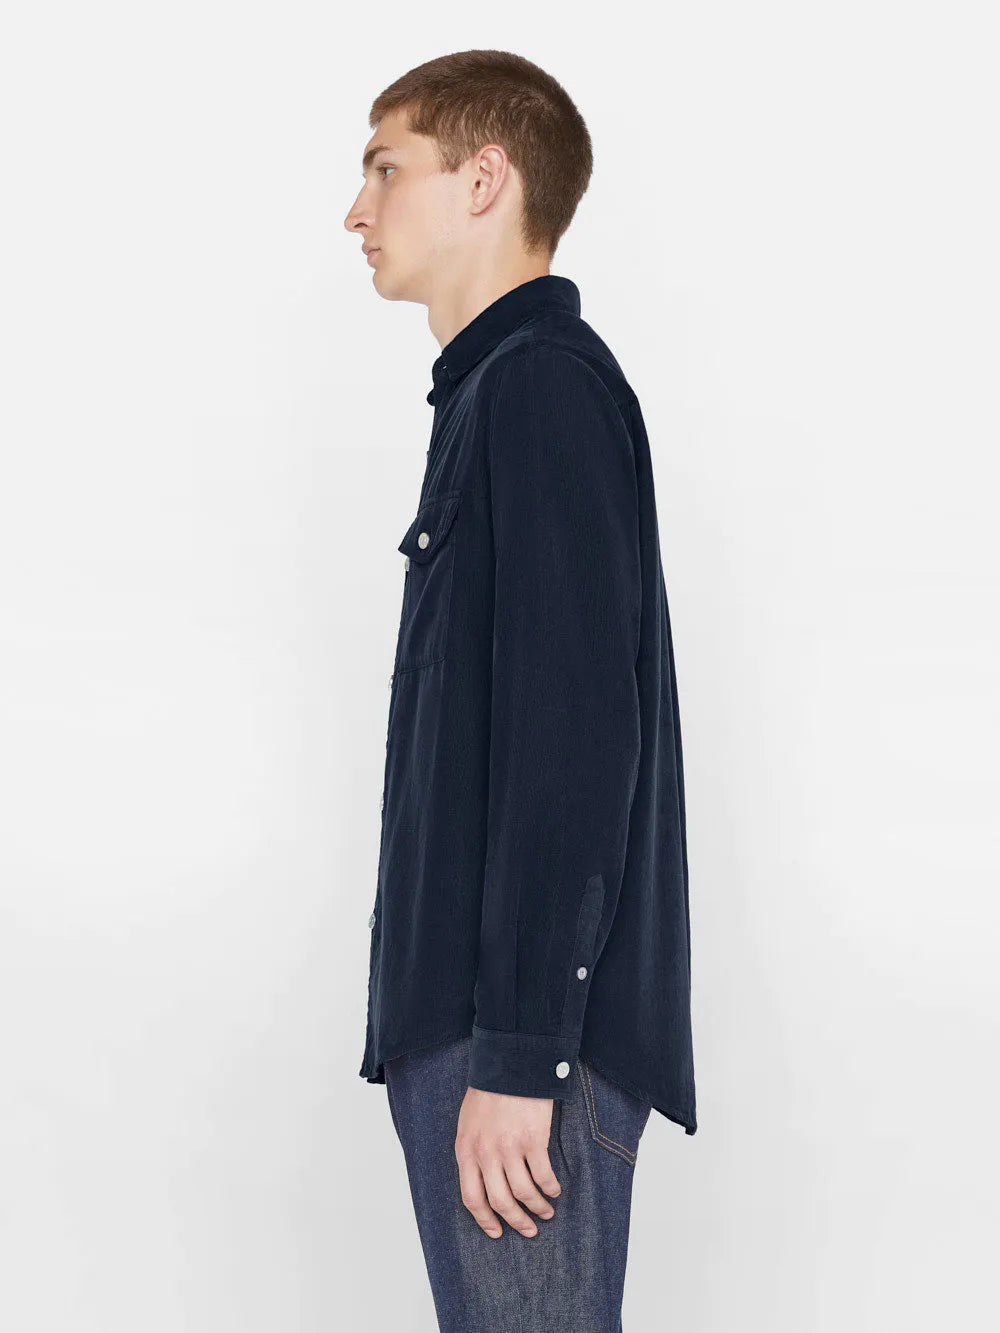 FRAME Mens Double Pocket Micro Corduroy Shirt in Midnight Blue